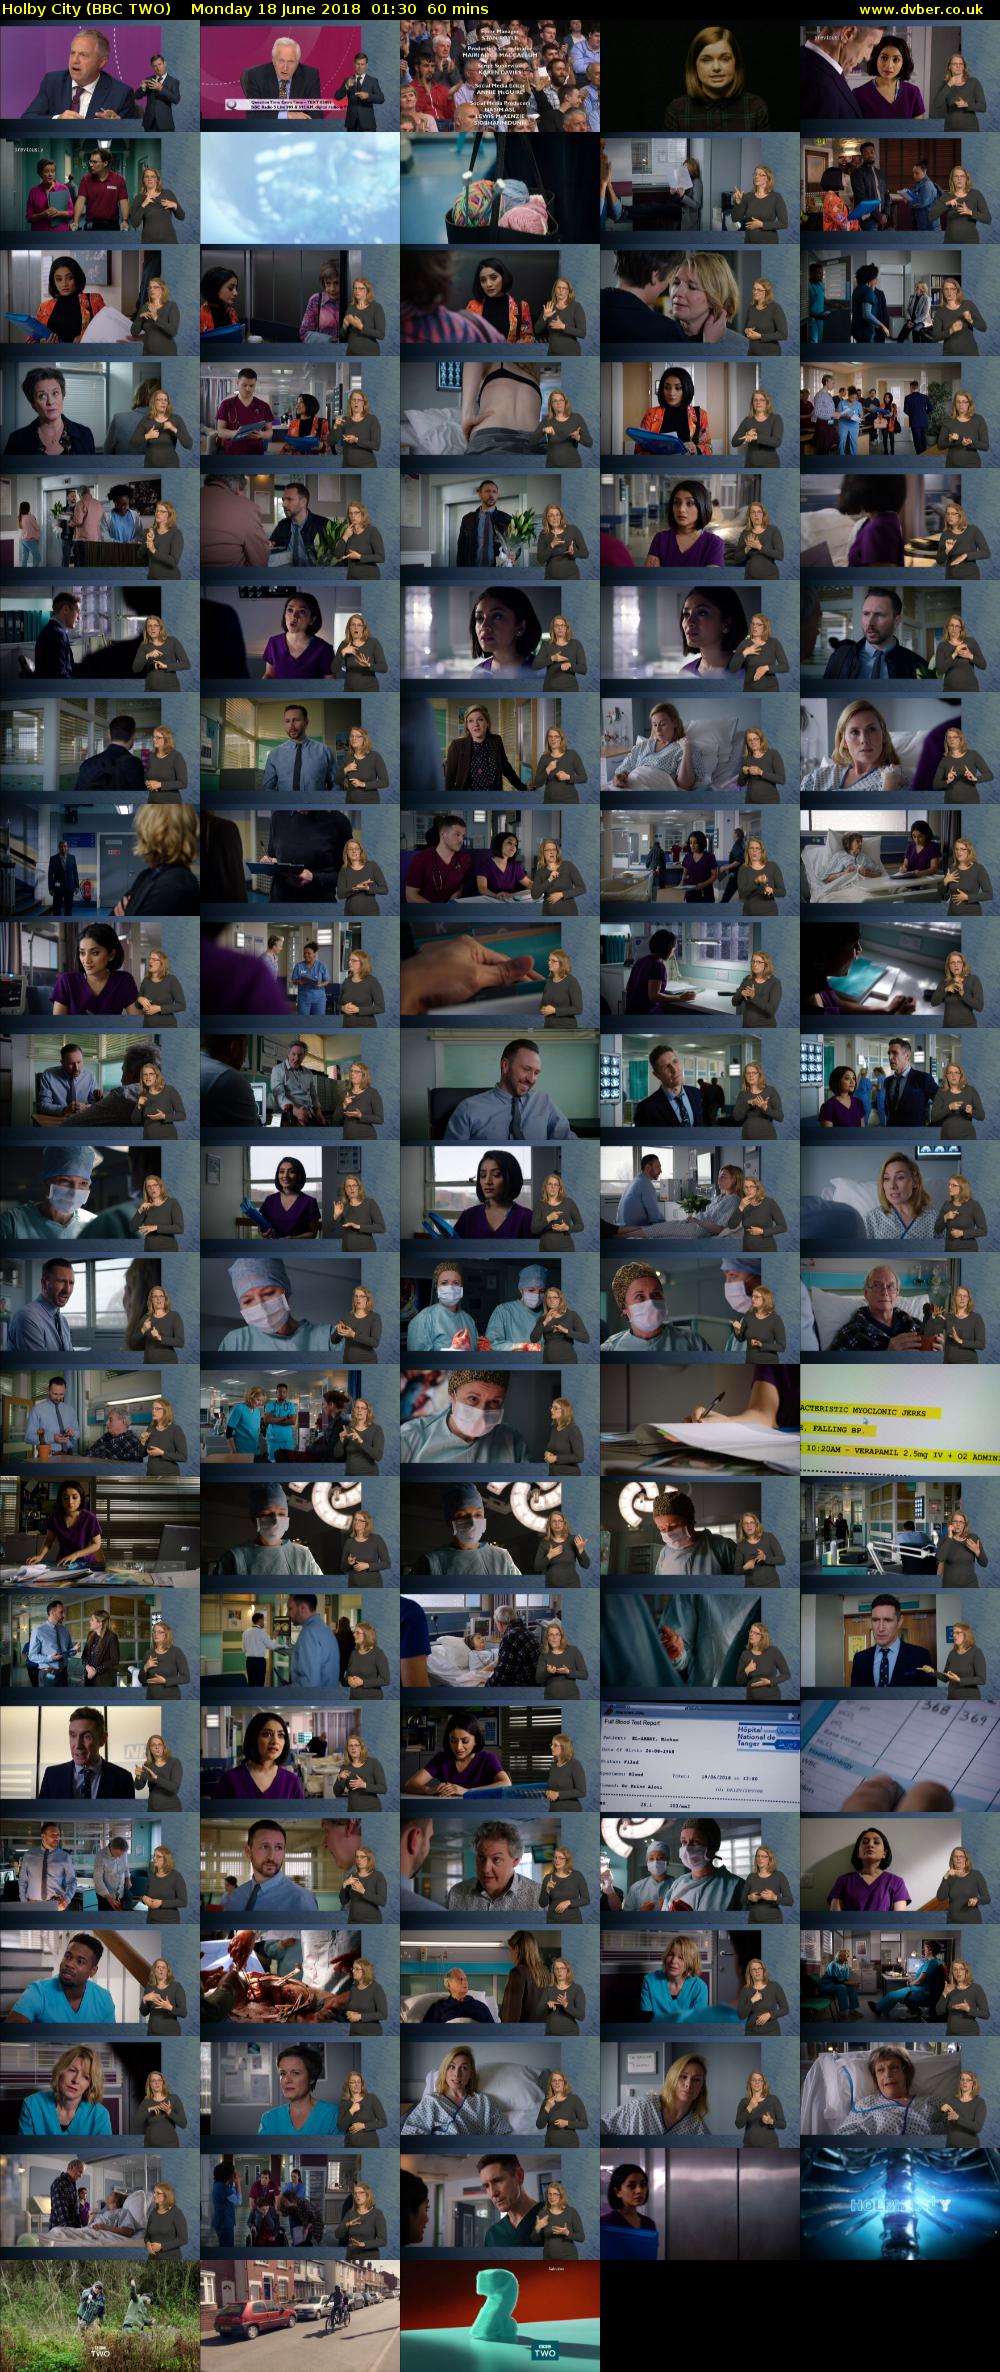 Holby City (BBC TWO) Monday 18 June 2018 01:30 - 02:30